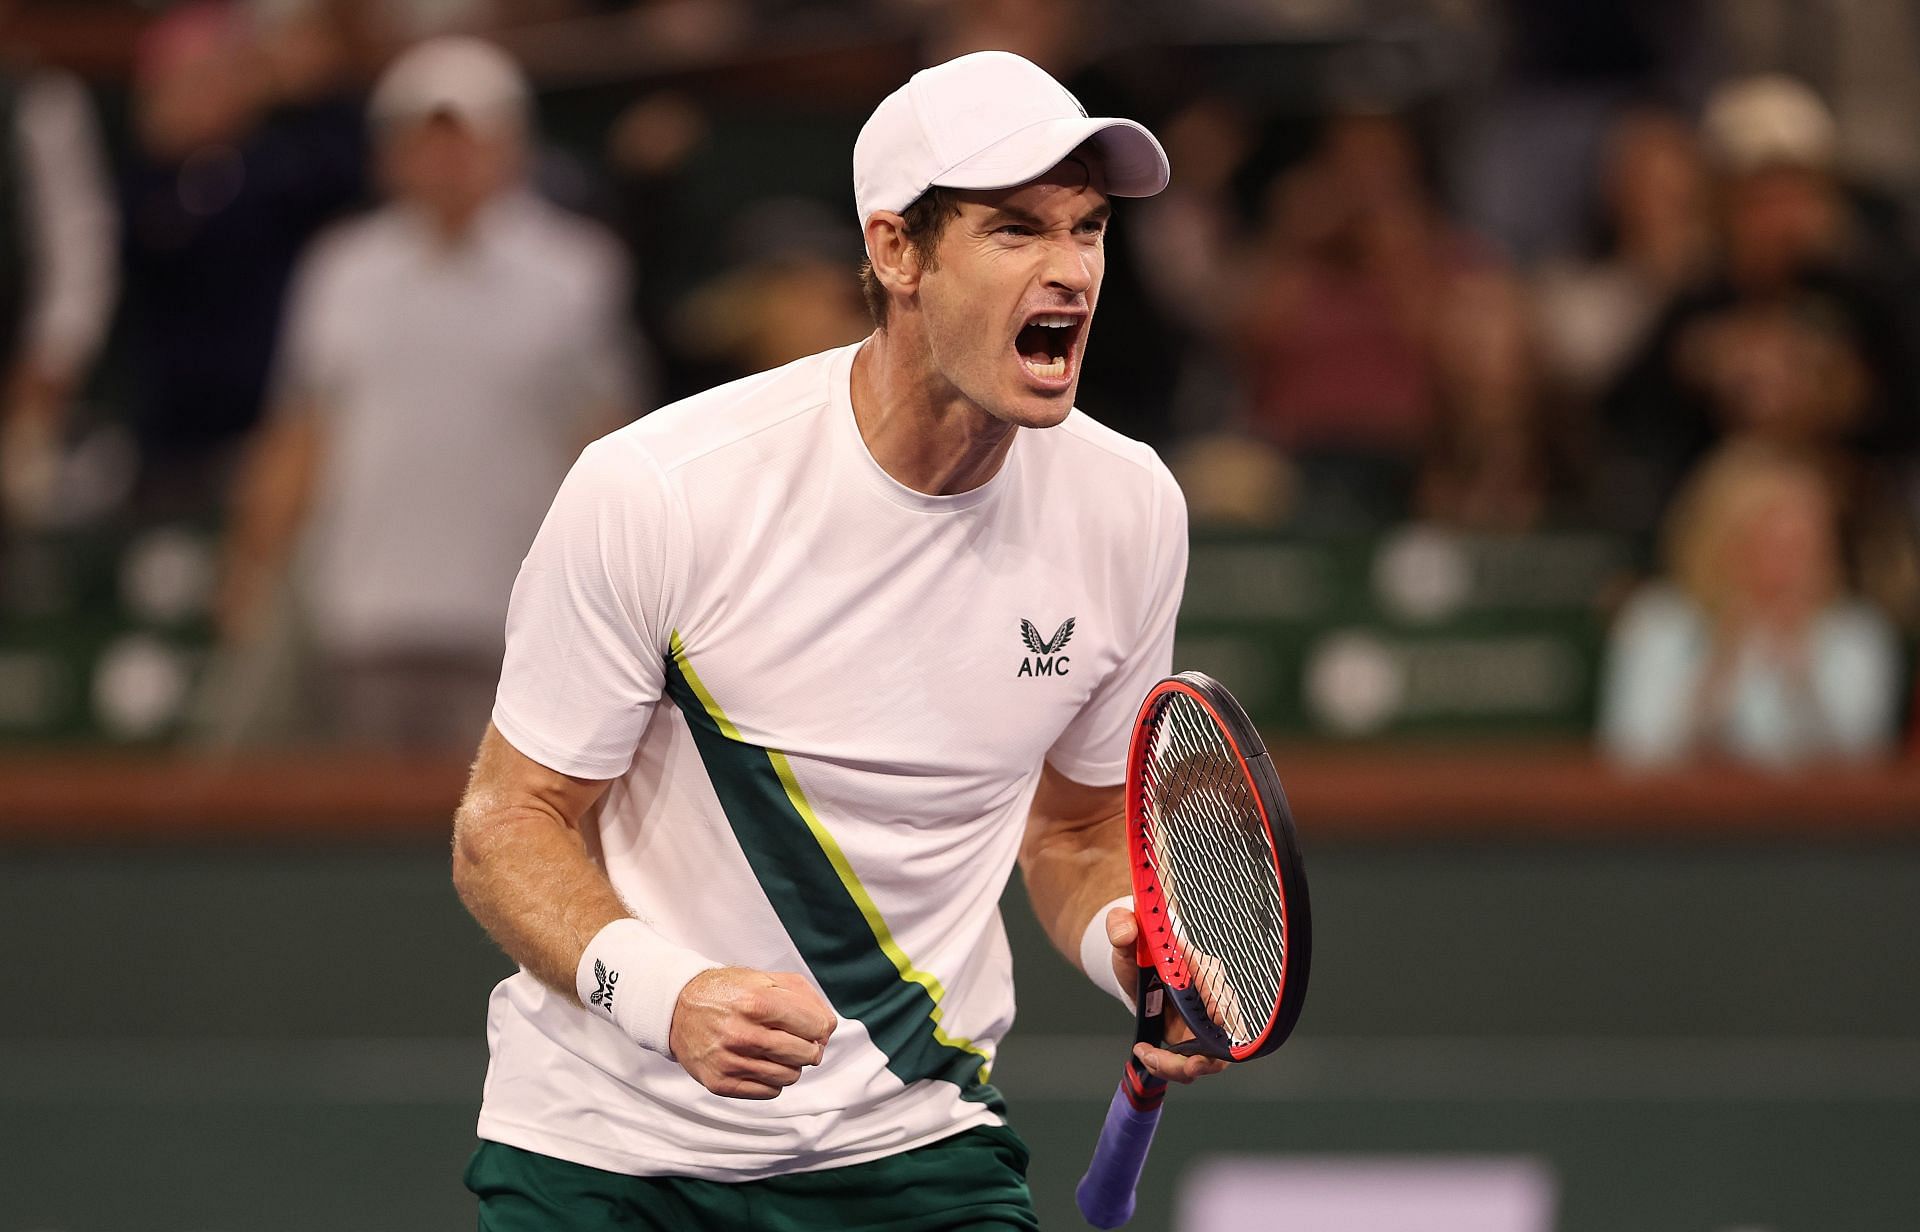 Andy Murray competes in the first round of Indian Wells 2023.